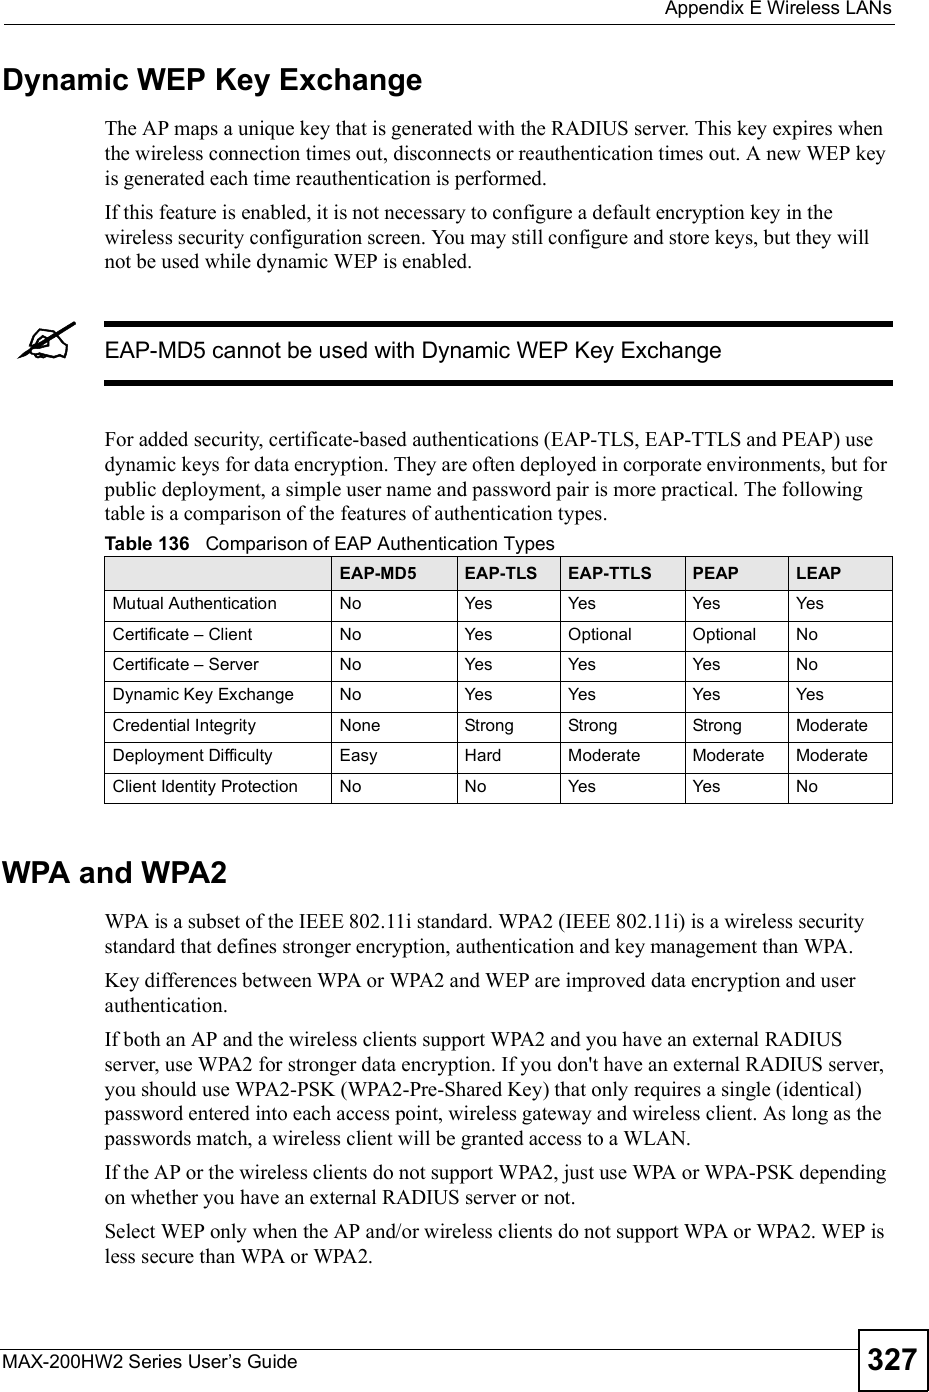  Appendix EWireless LANsMAX-200HW2 Series User s Guide 327Dynamic WEP Key ExchangeThe AP maps a unique key that is generated with the RADIUS server. This key expires when the wireless connection times out, disconnects or reauthentication times out. A new WEP key is generated each time reauthentication is performed.If this feature is enabled, it is not necessary to configure a default encryption key in the wireless security configuration screen. You may still configure and store keys, but they will not be used while dynamic WEP is enabled.EAP-MD5 cannot be used with Dynamic WEP Key ExchangeFor added security, certificate-based authentications (EAP-TLS, EAP-TTLS and PEAP) use dynamic keys for data encryption. They are often deployed in corporate environments, but for public deployment, a simple user name and password pair is more practical. The following table is a comparison of the features of authentication types.WPA and WPA2WPA is a subset of the IEEE 802.11i standard. WPA2 (IEEE 802.11i) is a wireless security standard that defines stronger encryption, authentication and key management than WPA. Key differences between WPA or WPA2 and WEP are improved data encryption and user authentication.If both an AP and the wireless clients support WPA2 and you have an external RADIUS server, use WPA2 for stronger data encryption. If you don&apos;t have an external RADIUS server, you should use WPA2-PSK (WPA2-Pre-Shared Key) that only requires a single (identical) password entered into each access point, wireless gateway and wireless client. As long as the passwords match, a wireless client will be granted access to a WLAN. If the AP or the wireless clients do not support WPA2, just use WPA or WPA-PSK depending on whether you have an external RADIUS server or not.Select WEP only when the AP and/or wireless clients do not support WPA or WPA2. WEP is less secure than WPA or WPA2.Table 136   Comparison of EAP Authentication TypesEAP-MD5 EAP-TLS EAP-TTLS PEAP LEAPMutual Authentication No Yes Yes Yes YesCertificate % Client No Yes Optional Optional NoCertificate % Server No Yes Yes Yes NoDynamic Key Exchange No Yes Yes Yes YesCredential Integrity None Strong Strong Strong ModerateDeployment Difficulty Easy Hard Moderate Moderate ModerateClient Identity Protection No No Yes Yes No